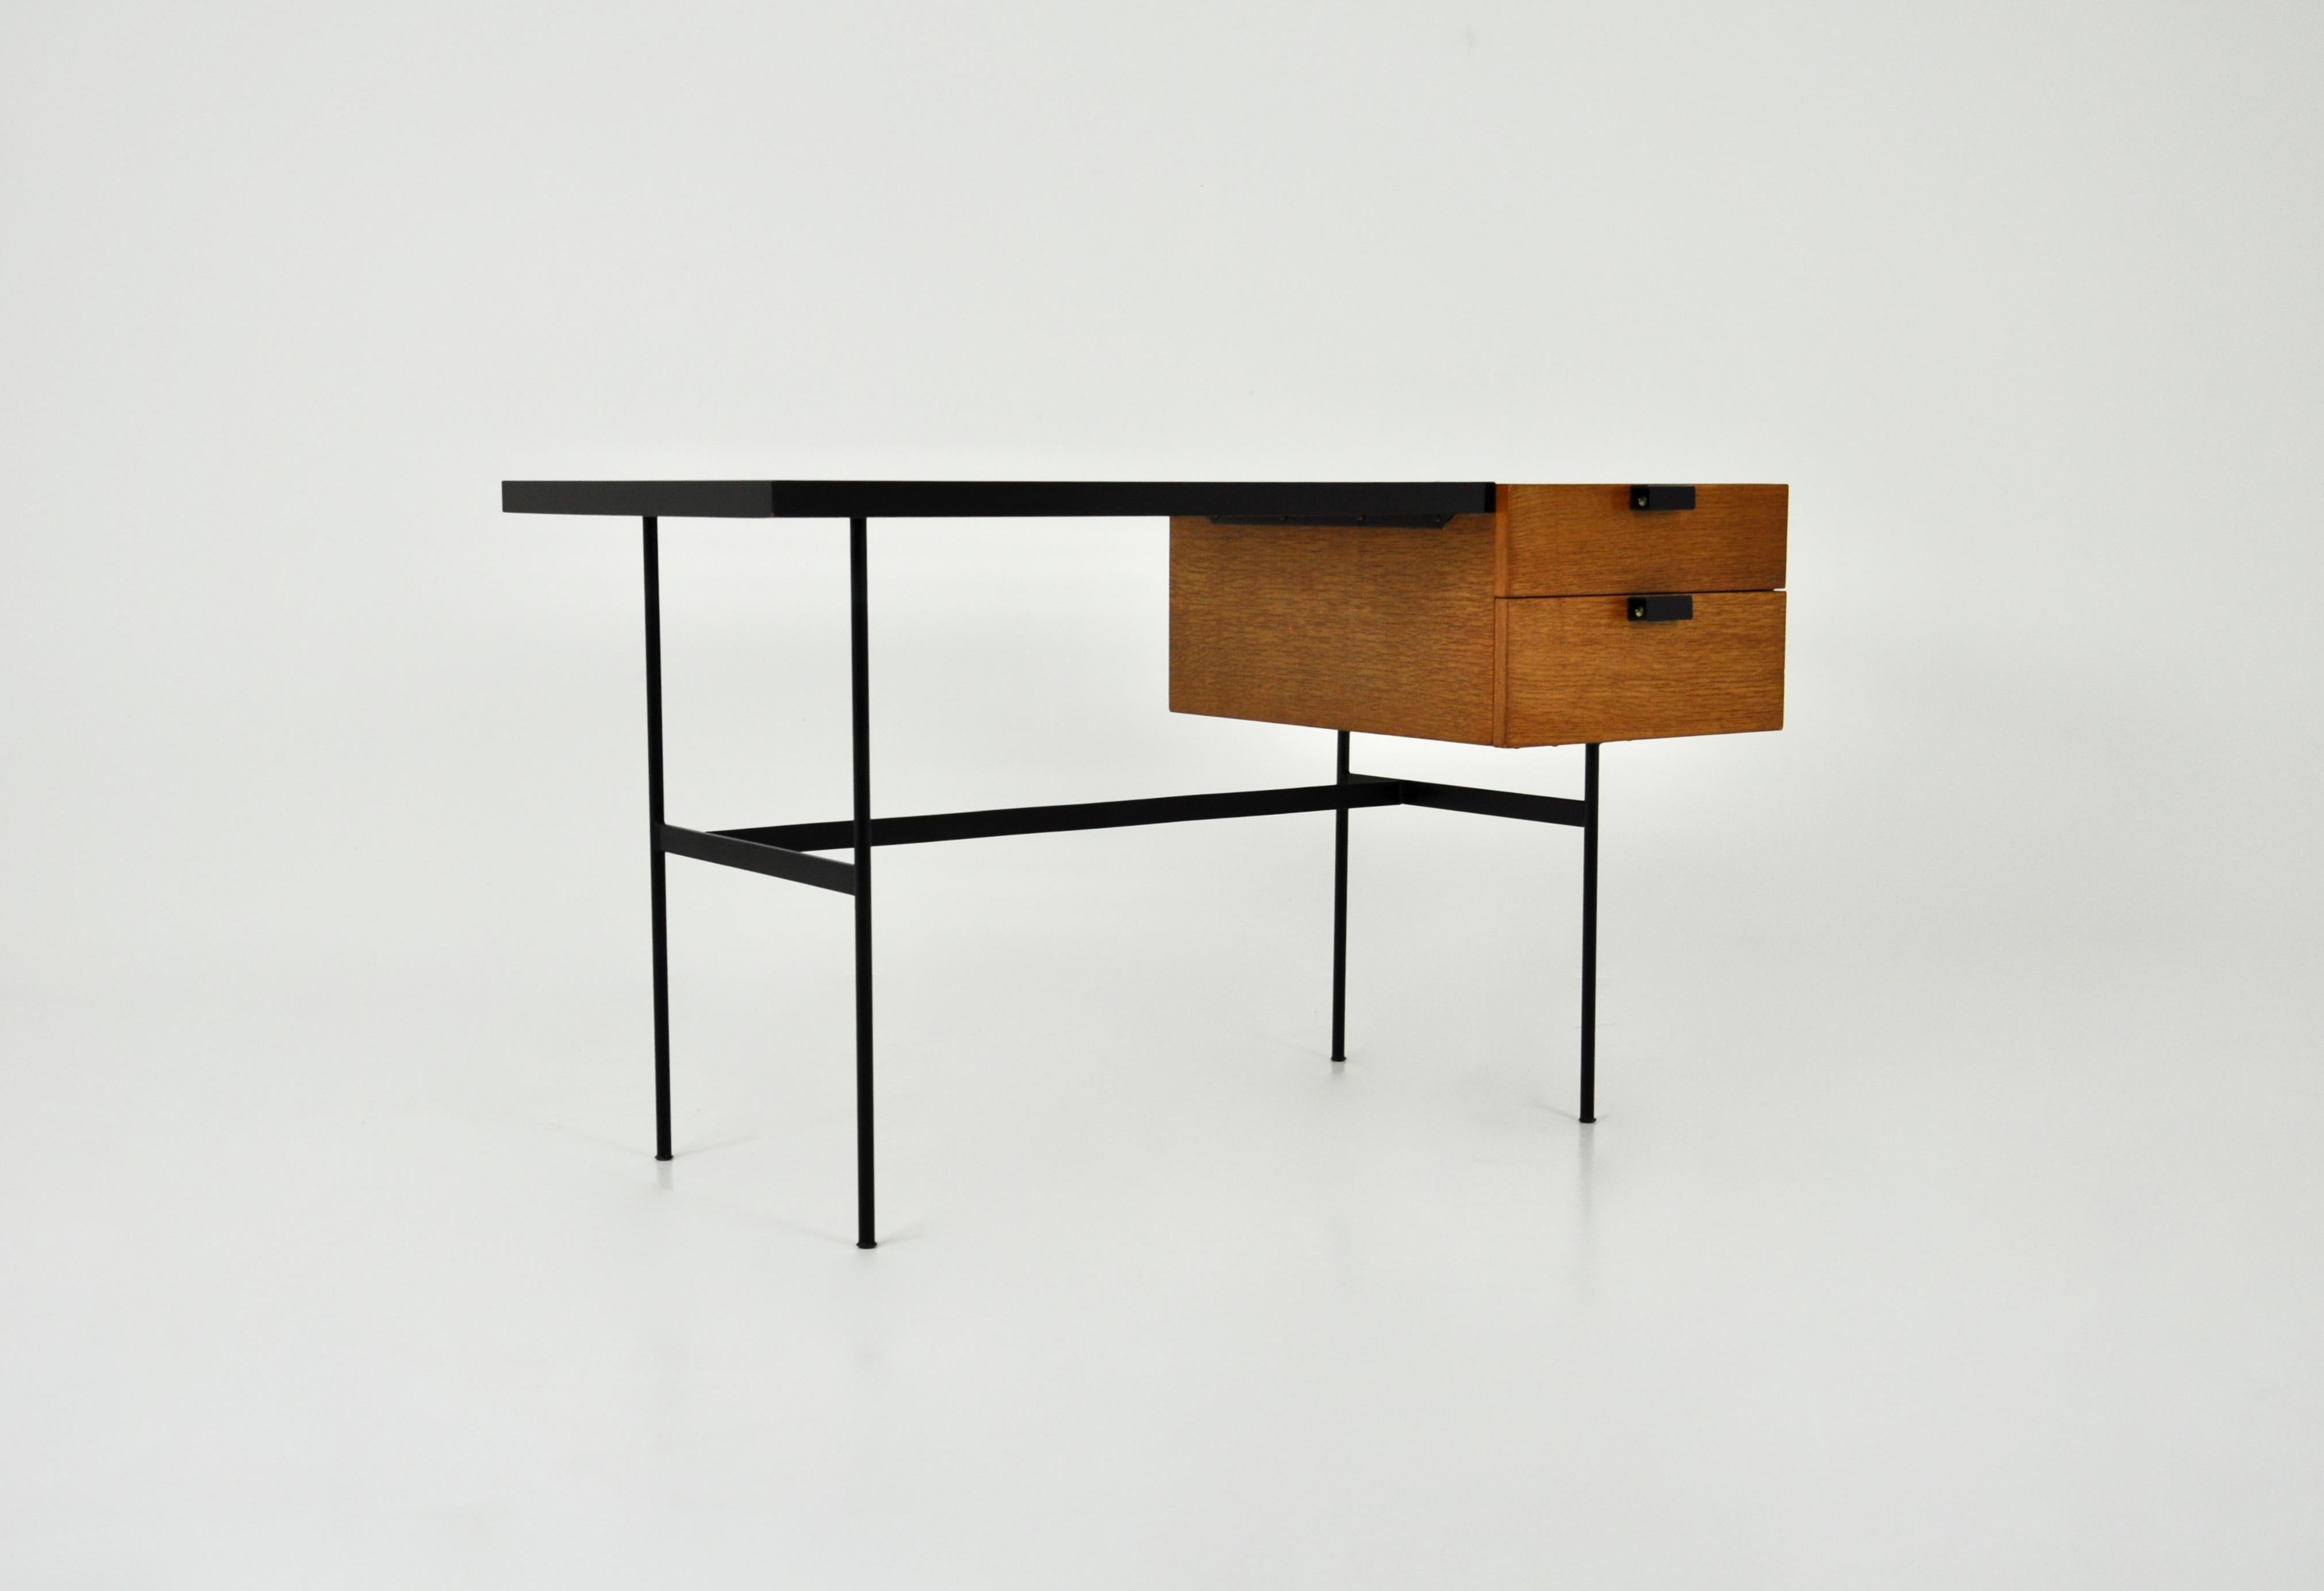 Desk with two wooden drawers, formica top and metal legs by Pierre Paulin. Marks of wear on the top due to the age of the desk.